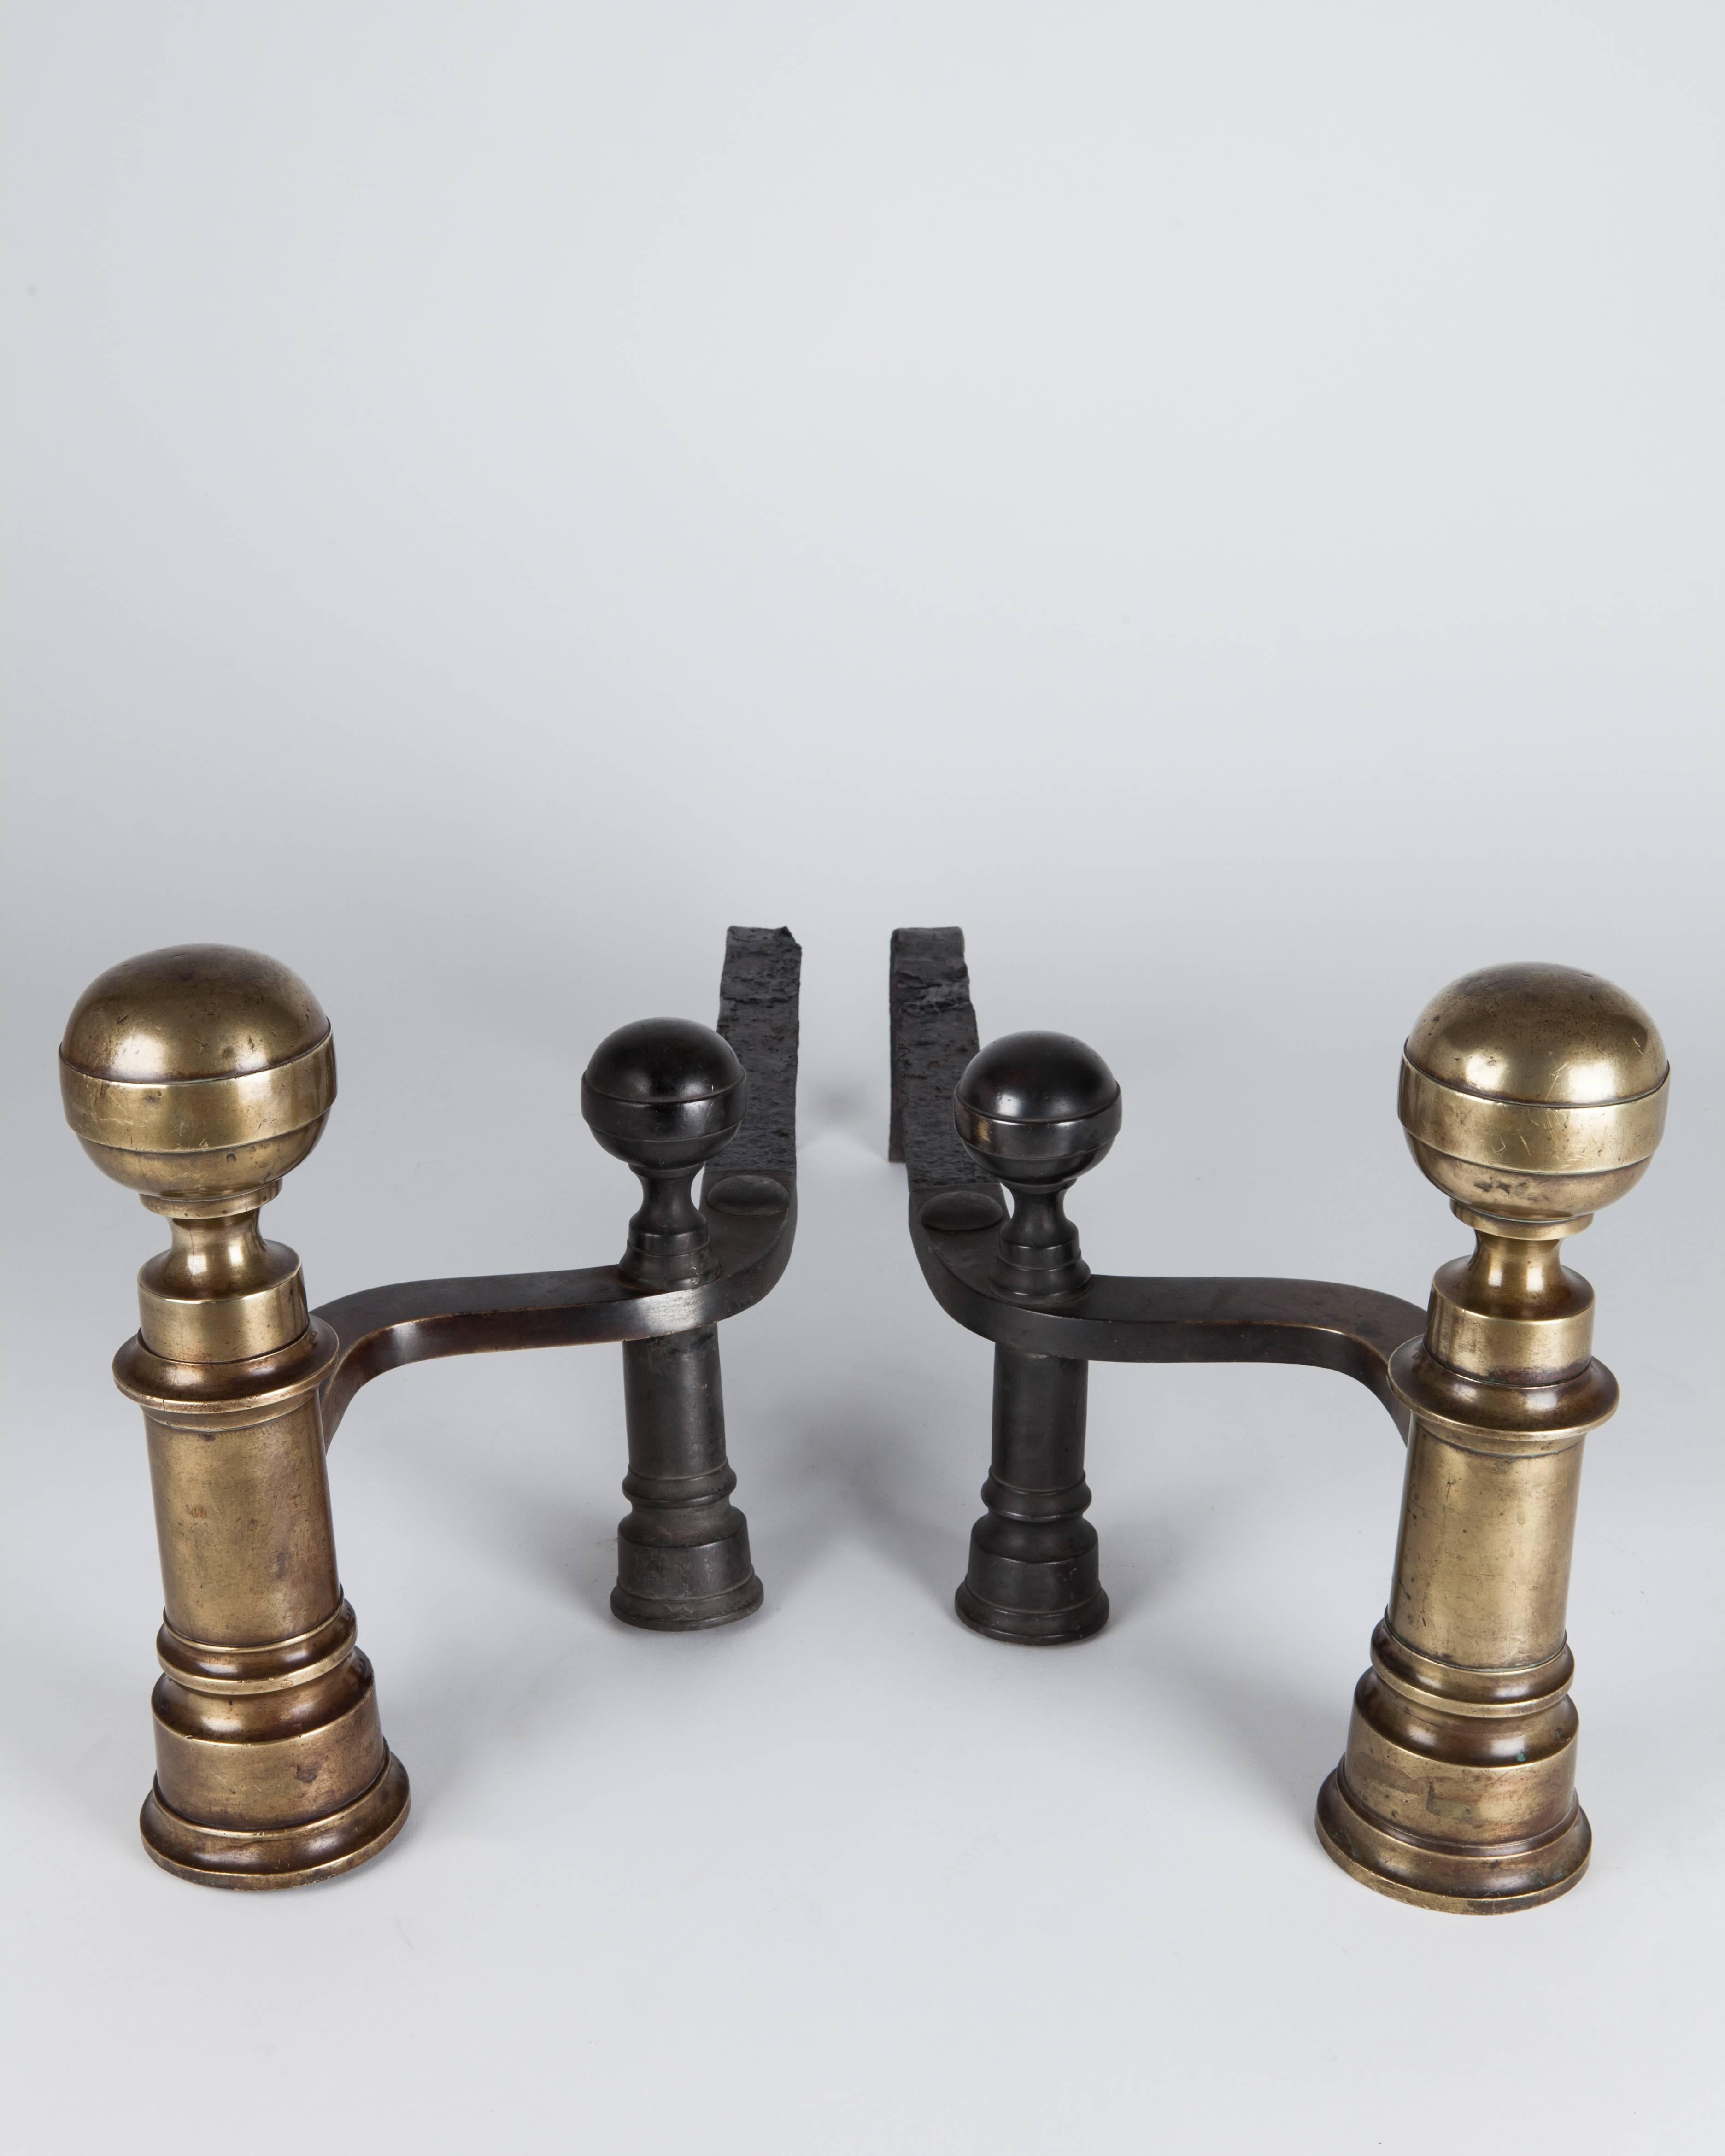 AFP0561
A pair of andirons in their original aged brass and blackened iron finish, after a pattern by the Boston maker William Hunneman having tapered bodies topped with ball finials. A related pair is shown in Donald Fennimore's book 